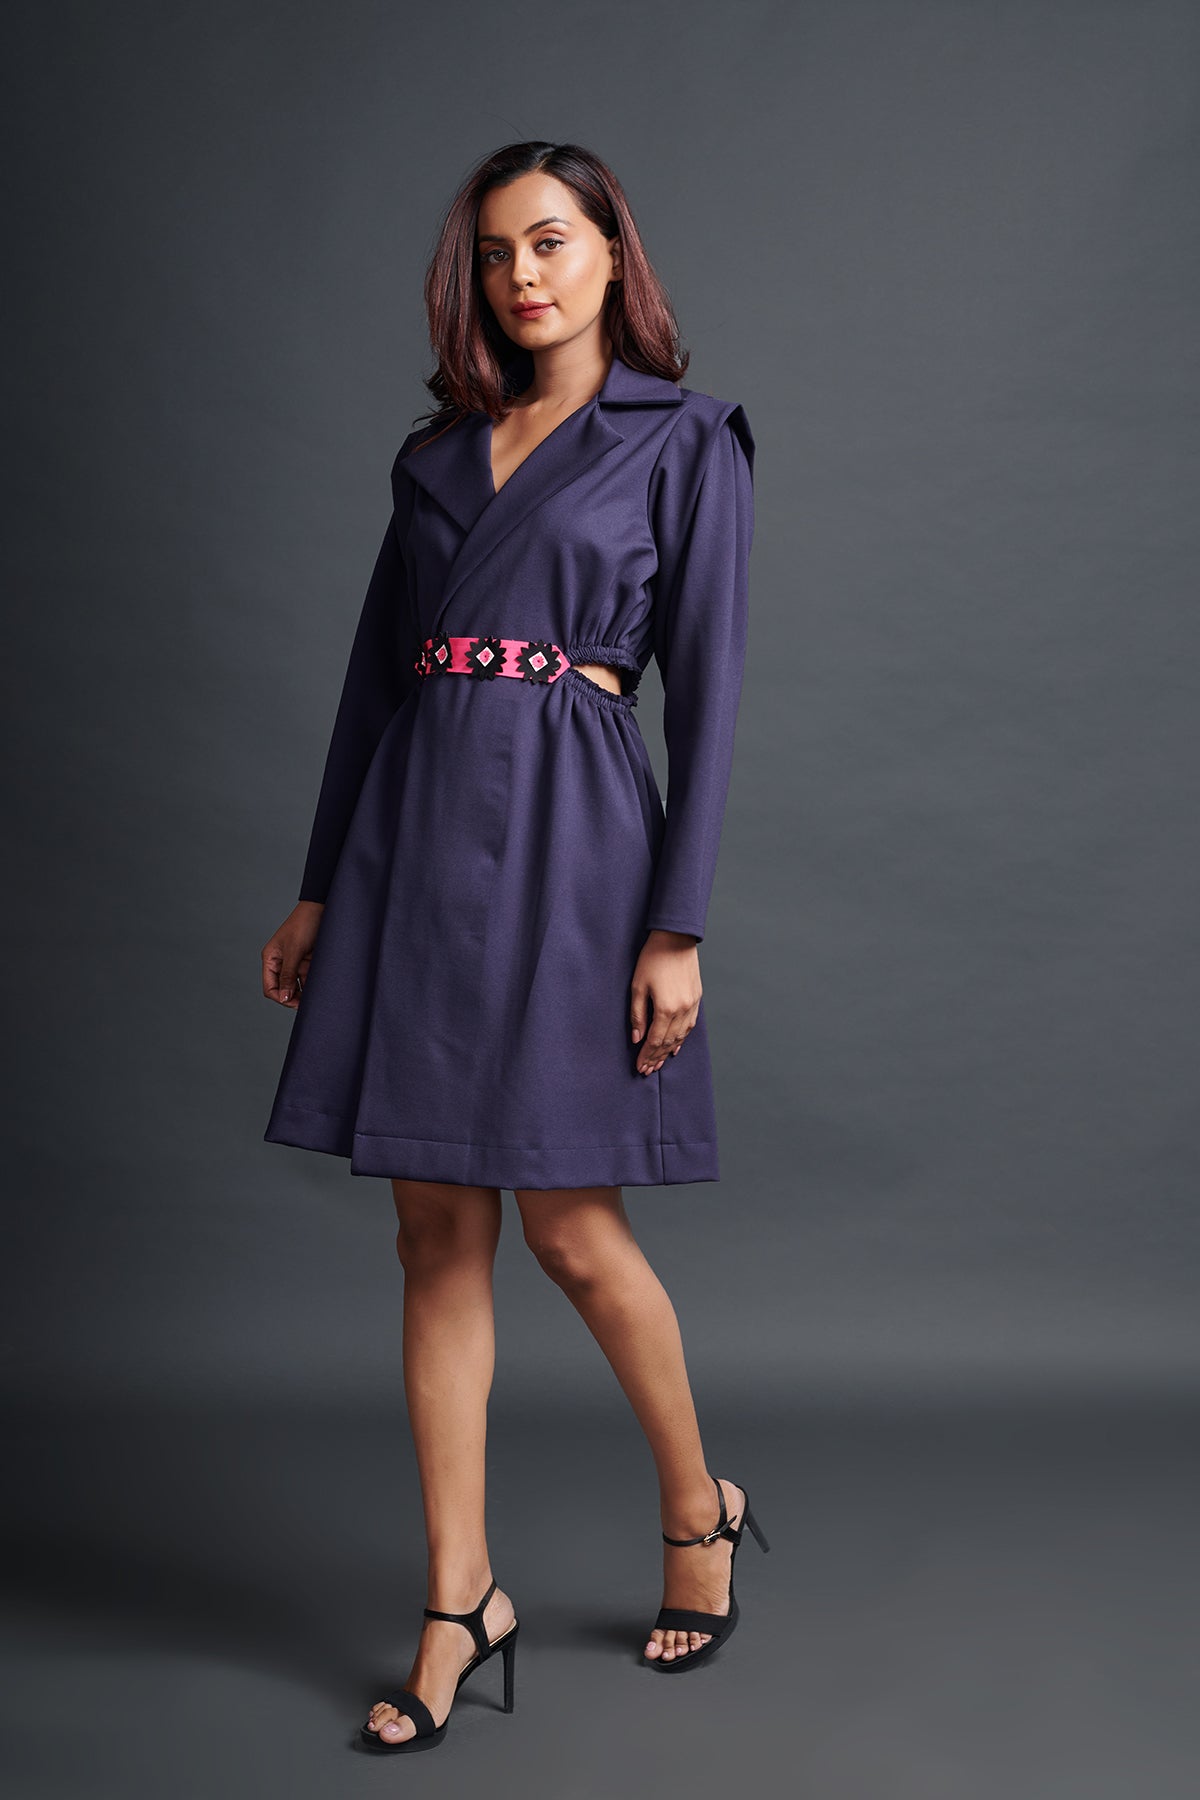 Image of PURPLE SIDE CUT JACKET DRESS WITH NEON FLOWER BELT. From savoirfashions.com